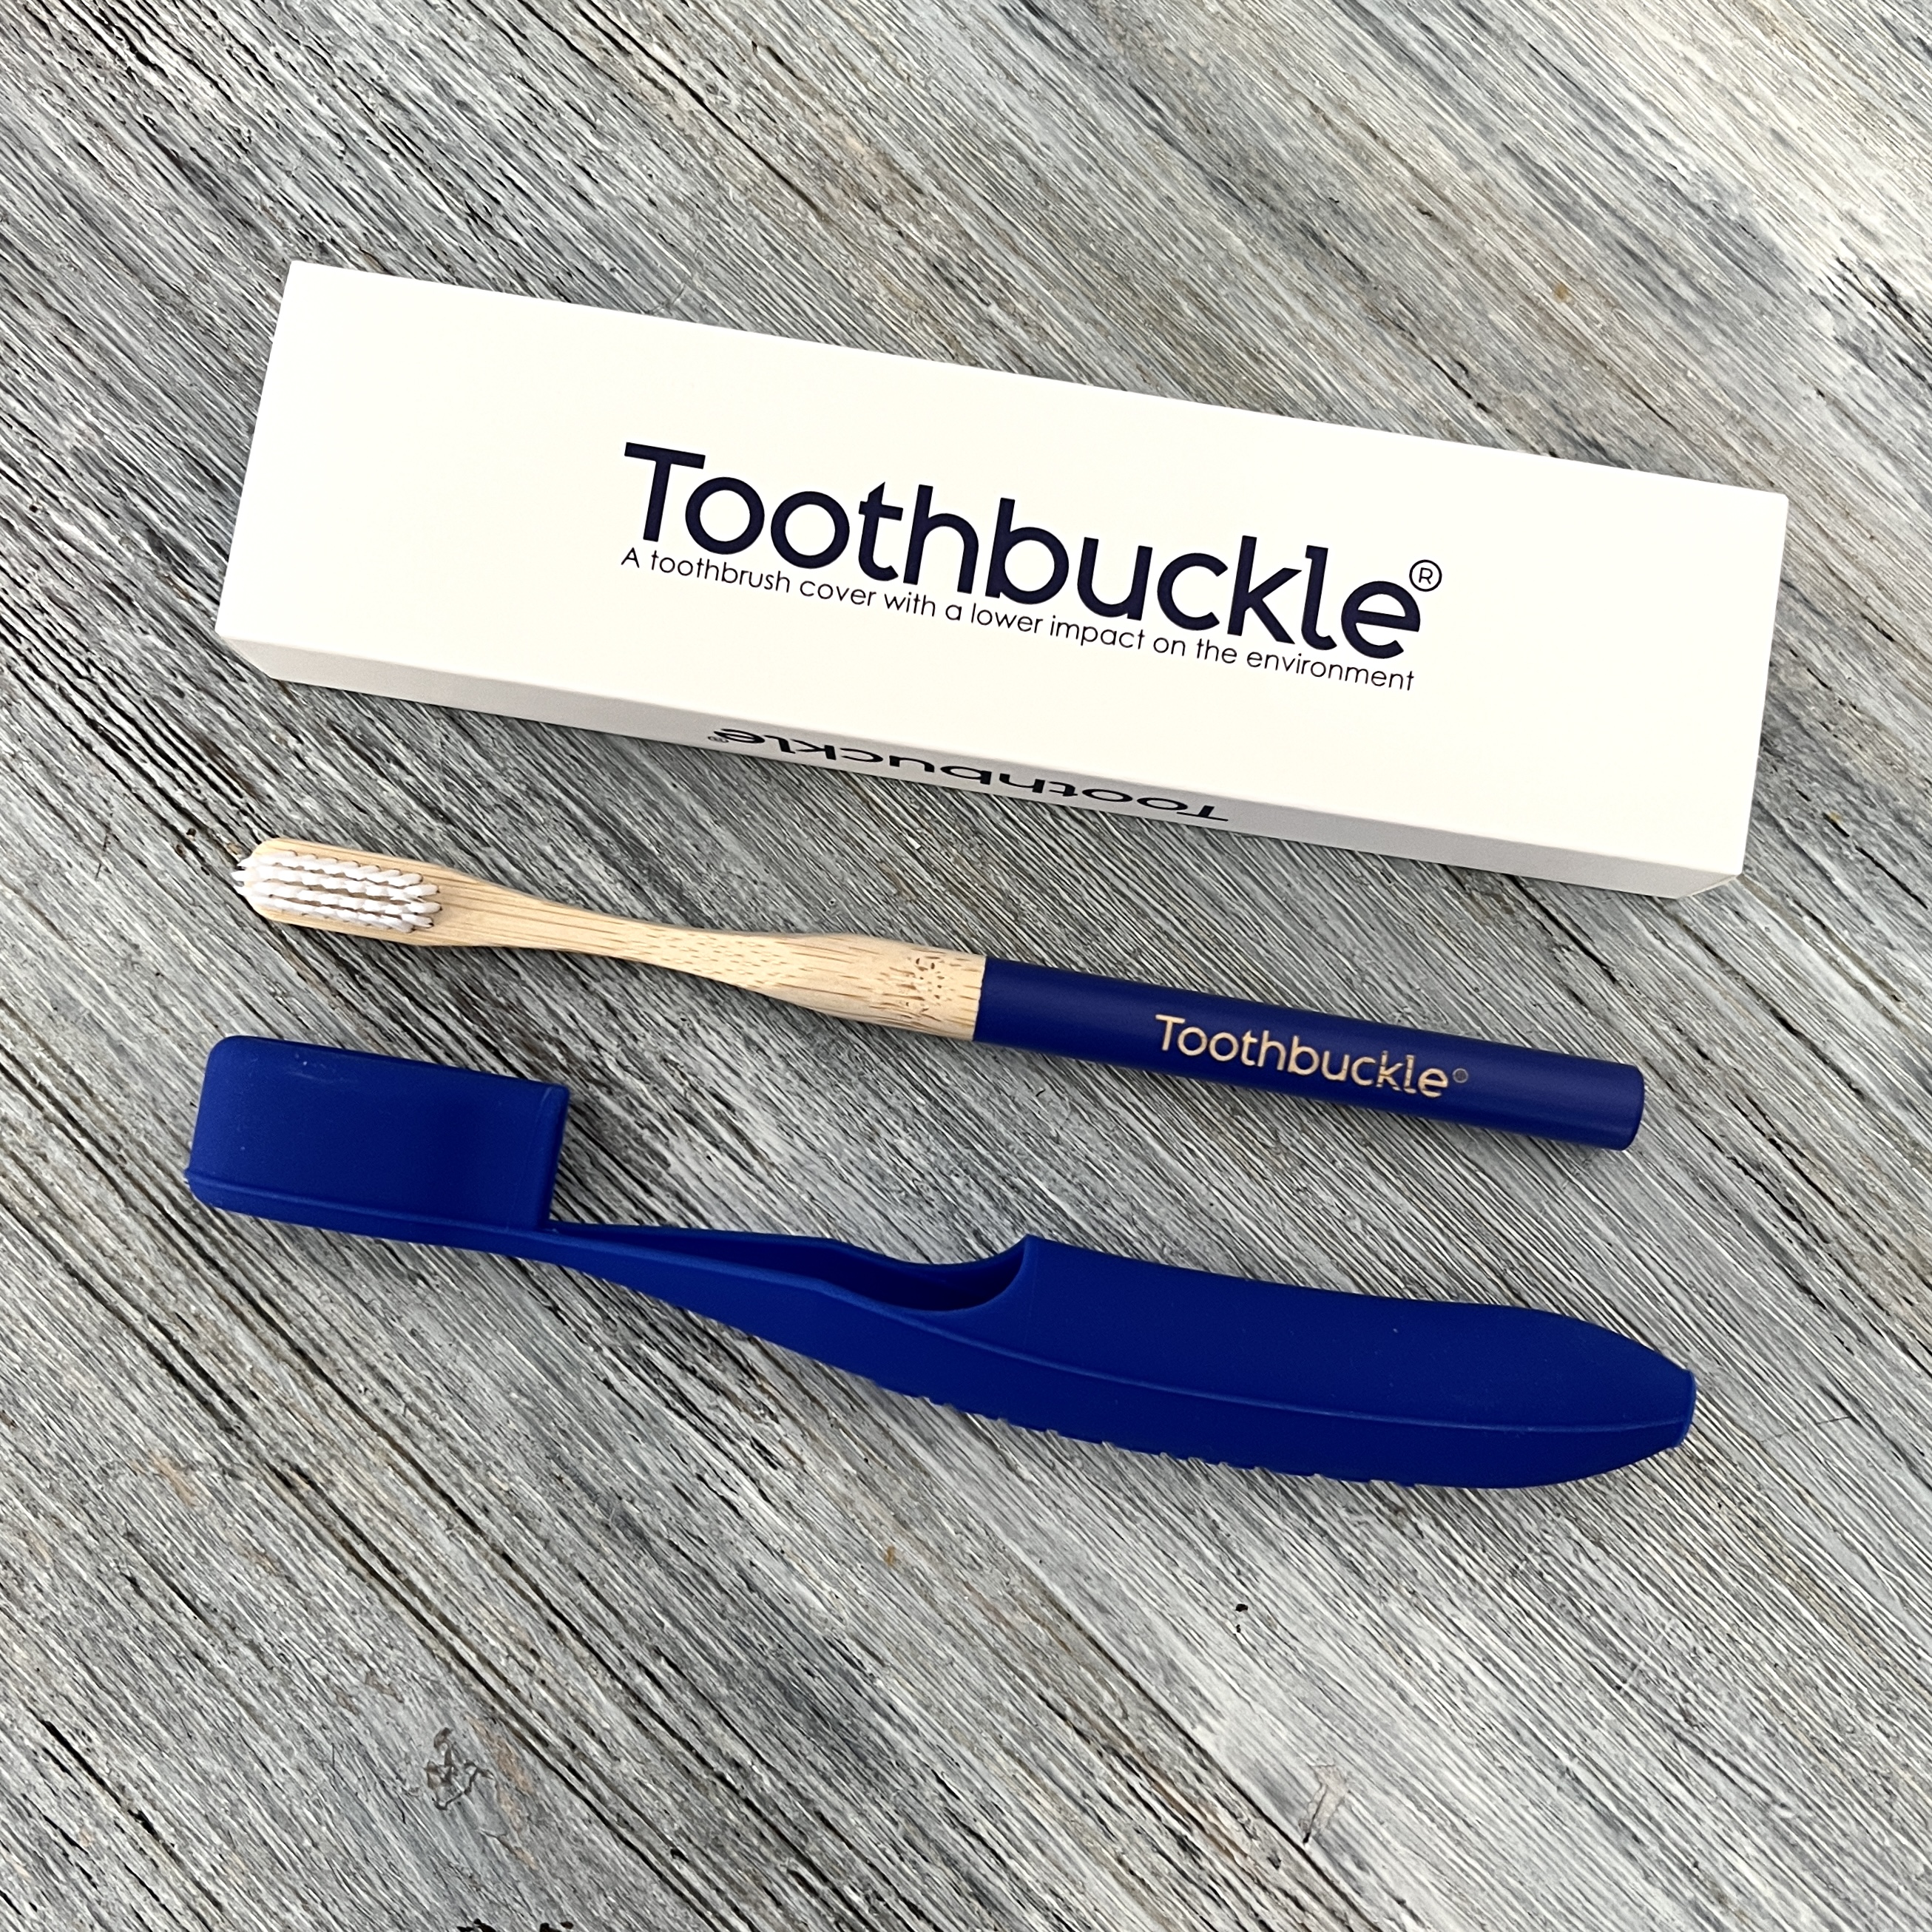 Toothbuckle Toothbrush Kit for Bombay and Cedar Lifestyle Box January 2022